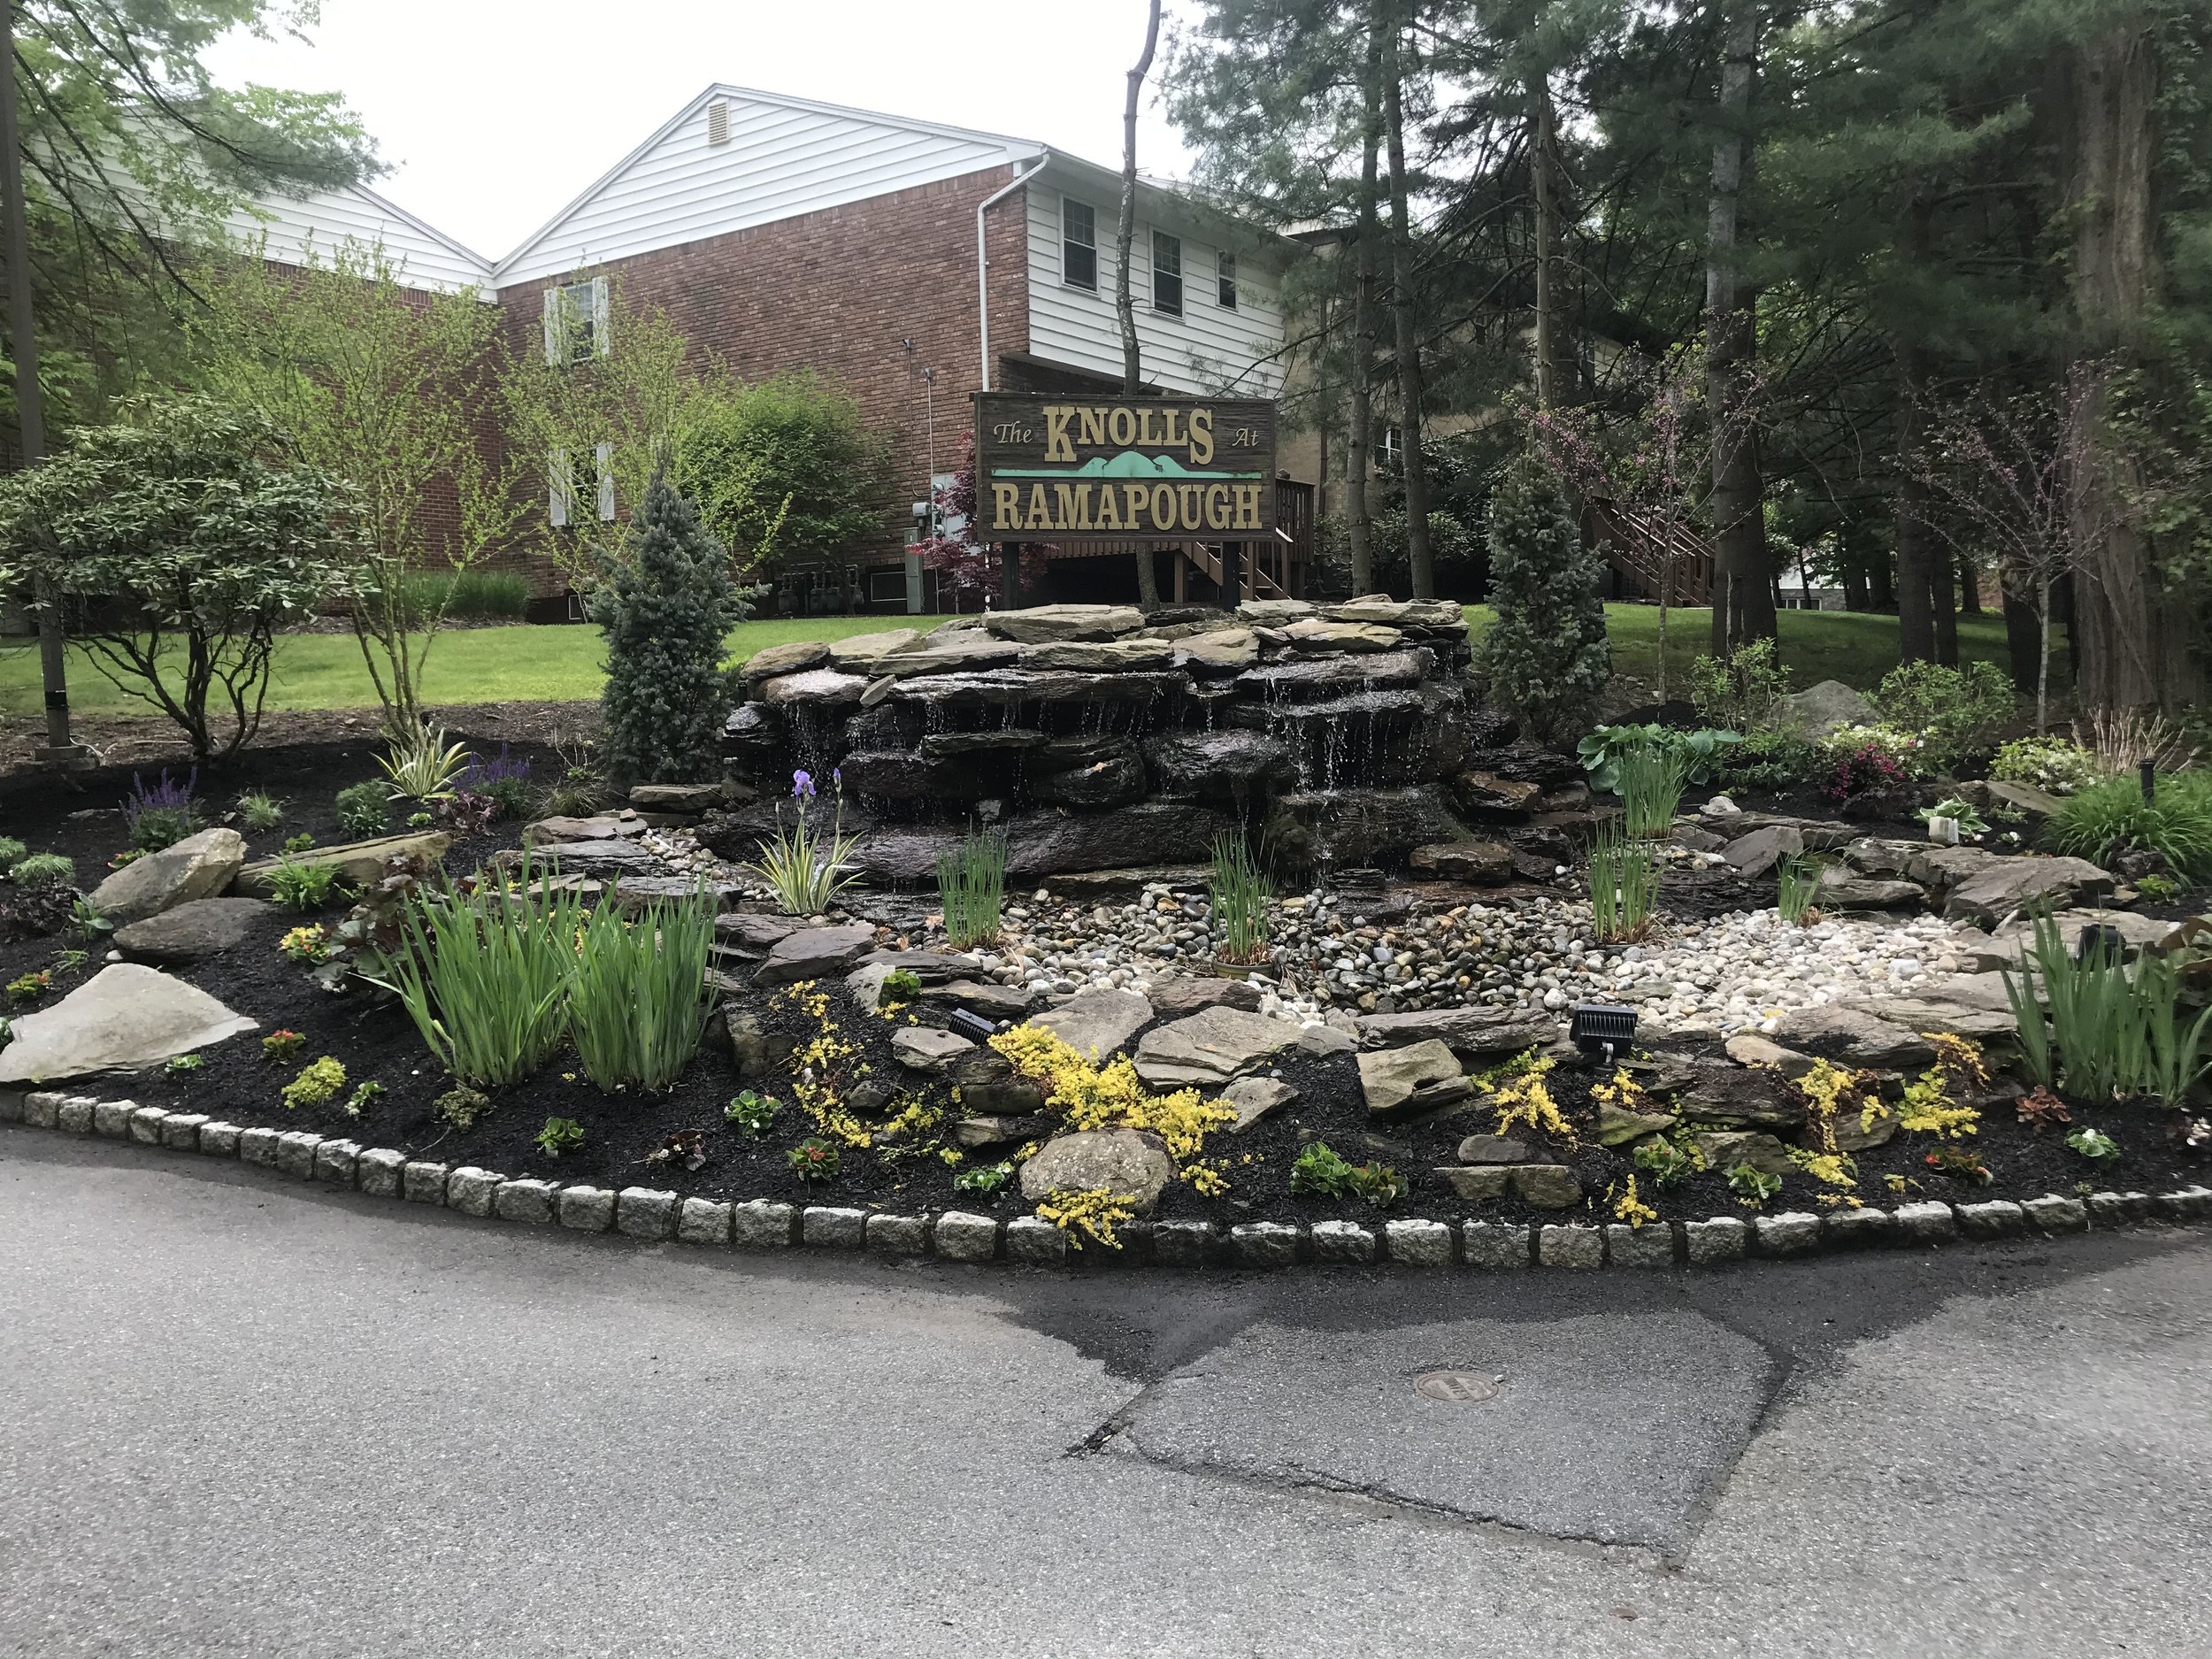 Commercial Landscaper for Community Housing, Condominiums and Townhomes